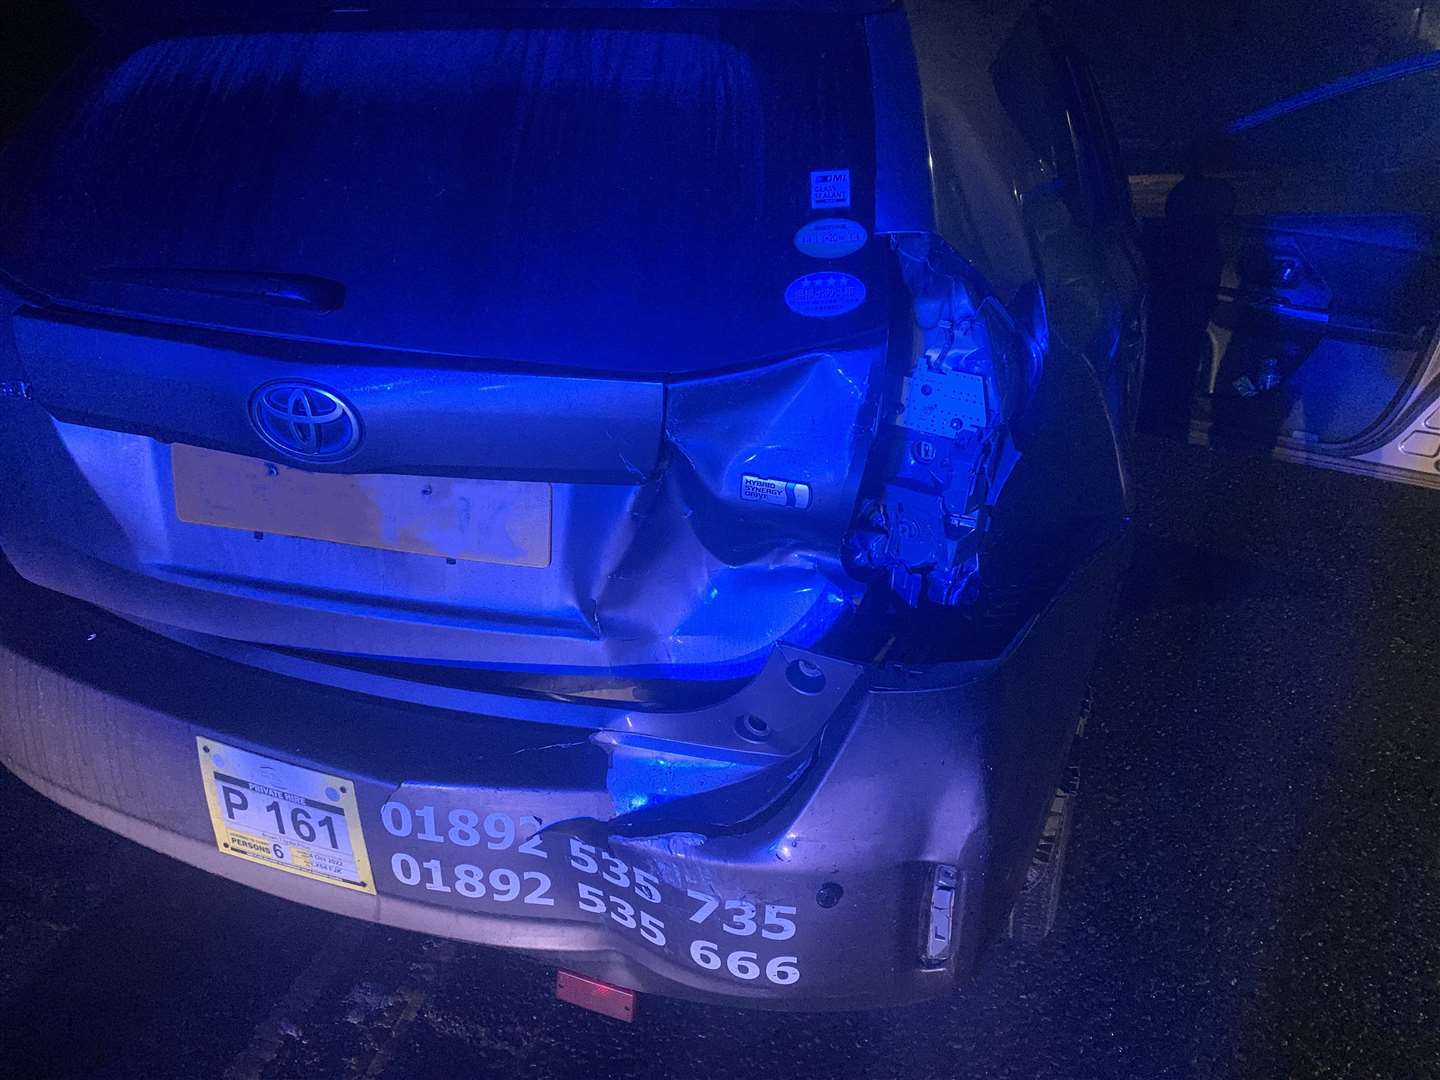 Mr Saif Arain's damaged taxi after police launched a murder inquiry in Tunbridge Wells